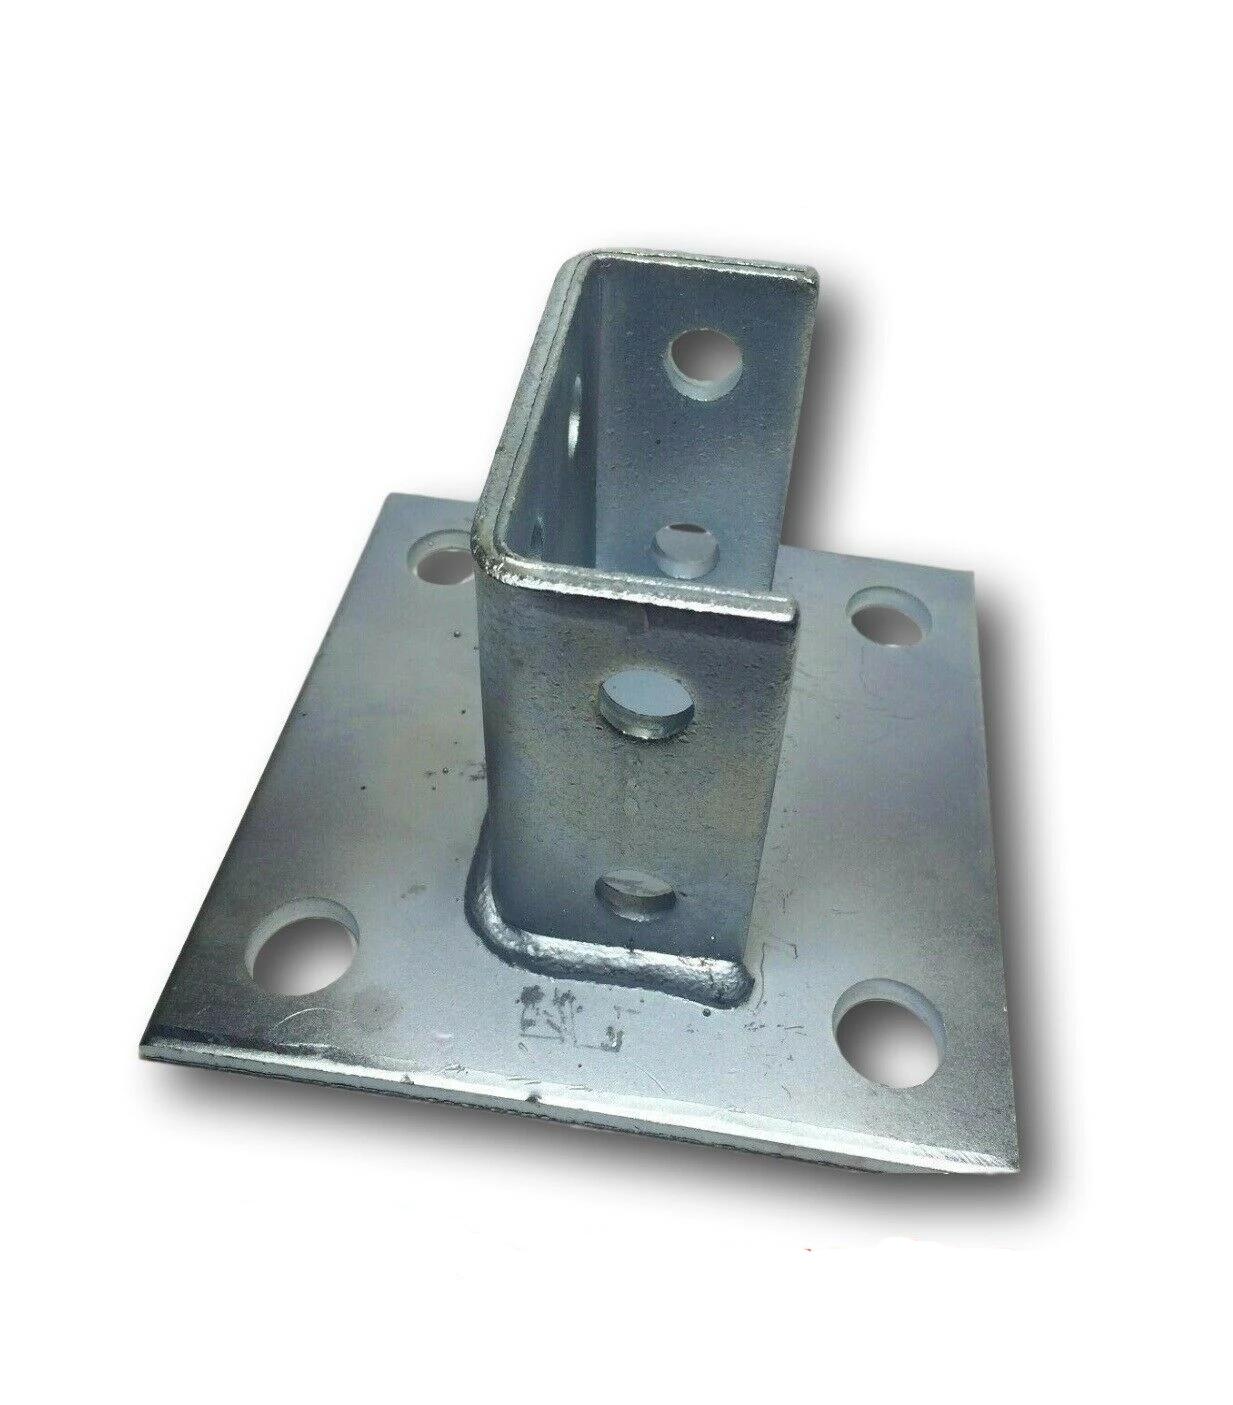 (#4777) (P2073A SQ EG) Squared Post Base for Unistrut Double Channel